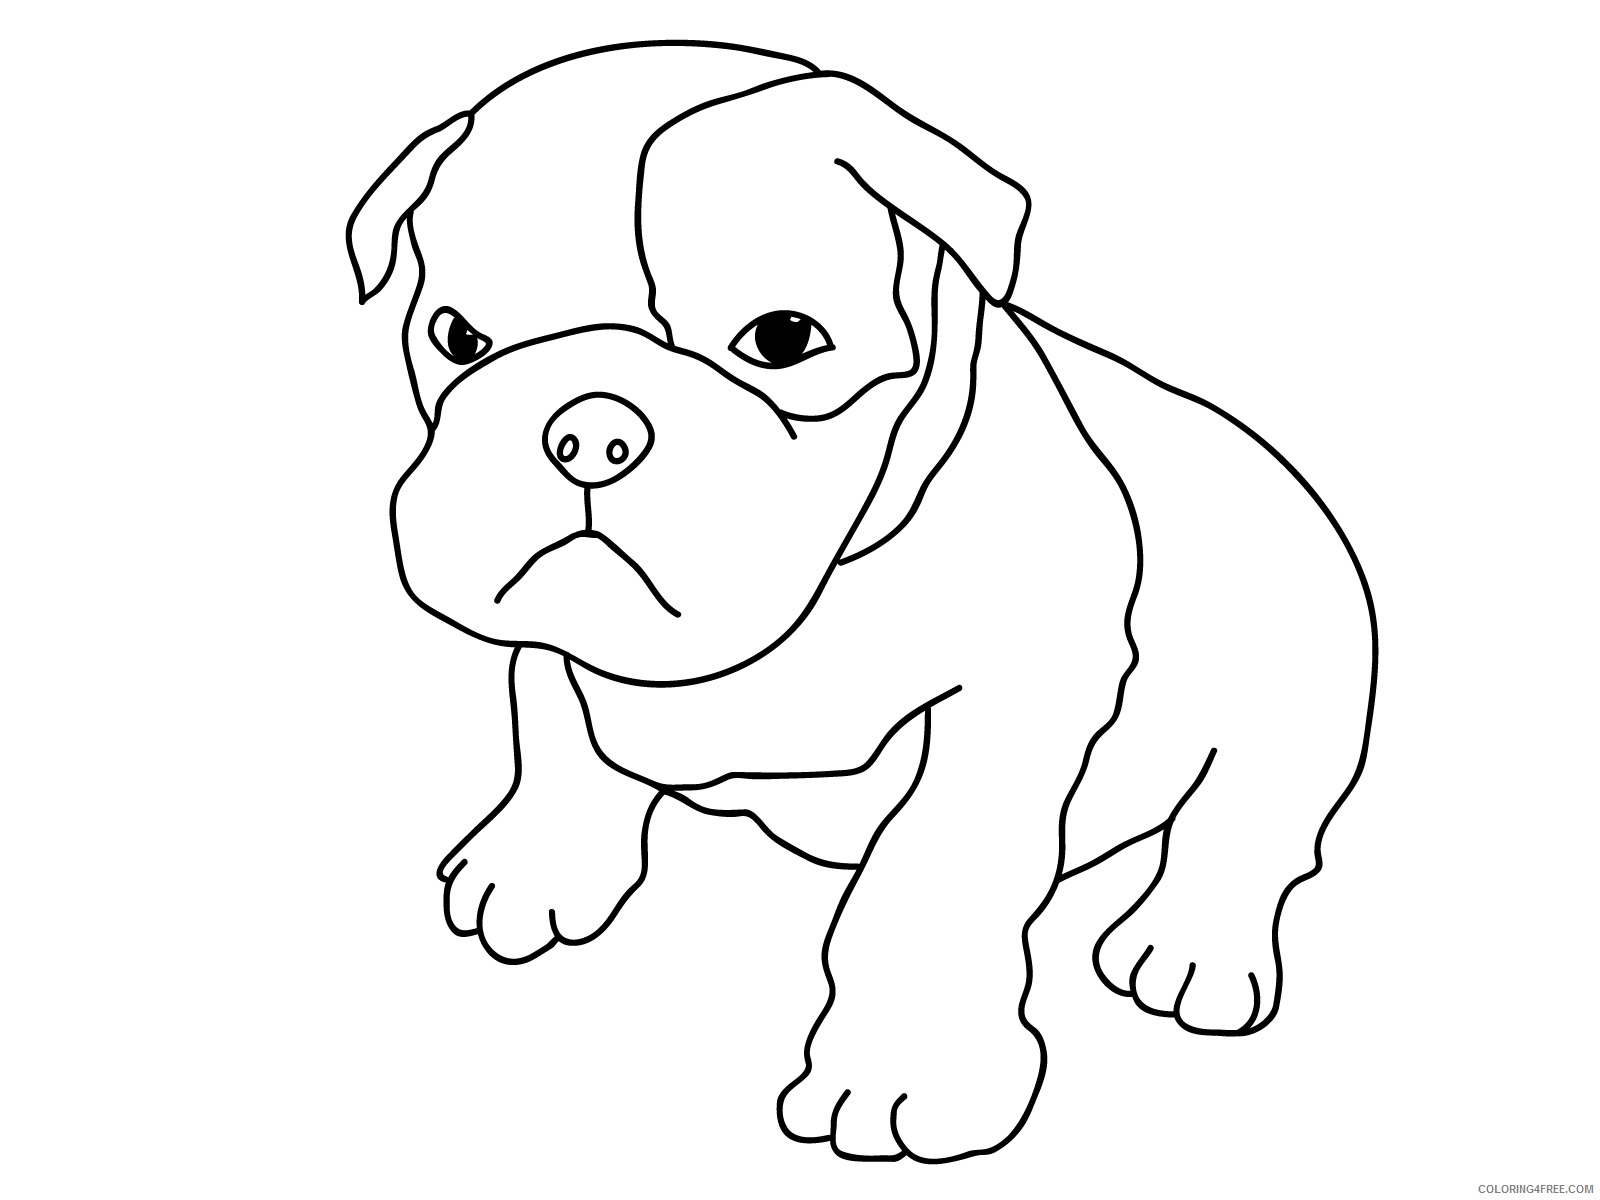 Dogs Coloring Pages Animal Printable Sheets Color of Dogs 2021 1540 Coloring4free